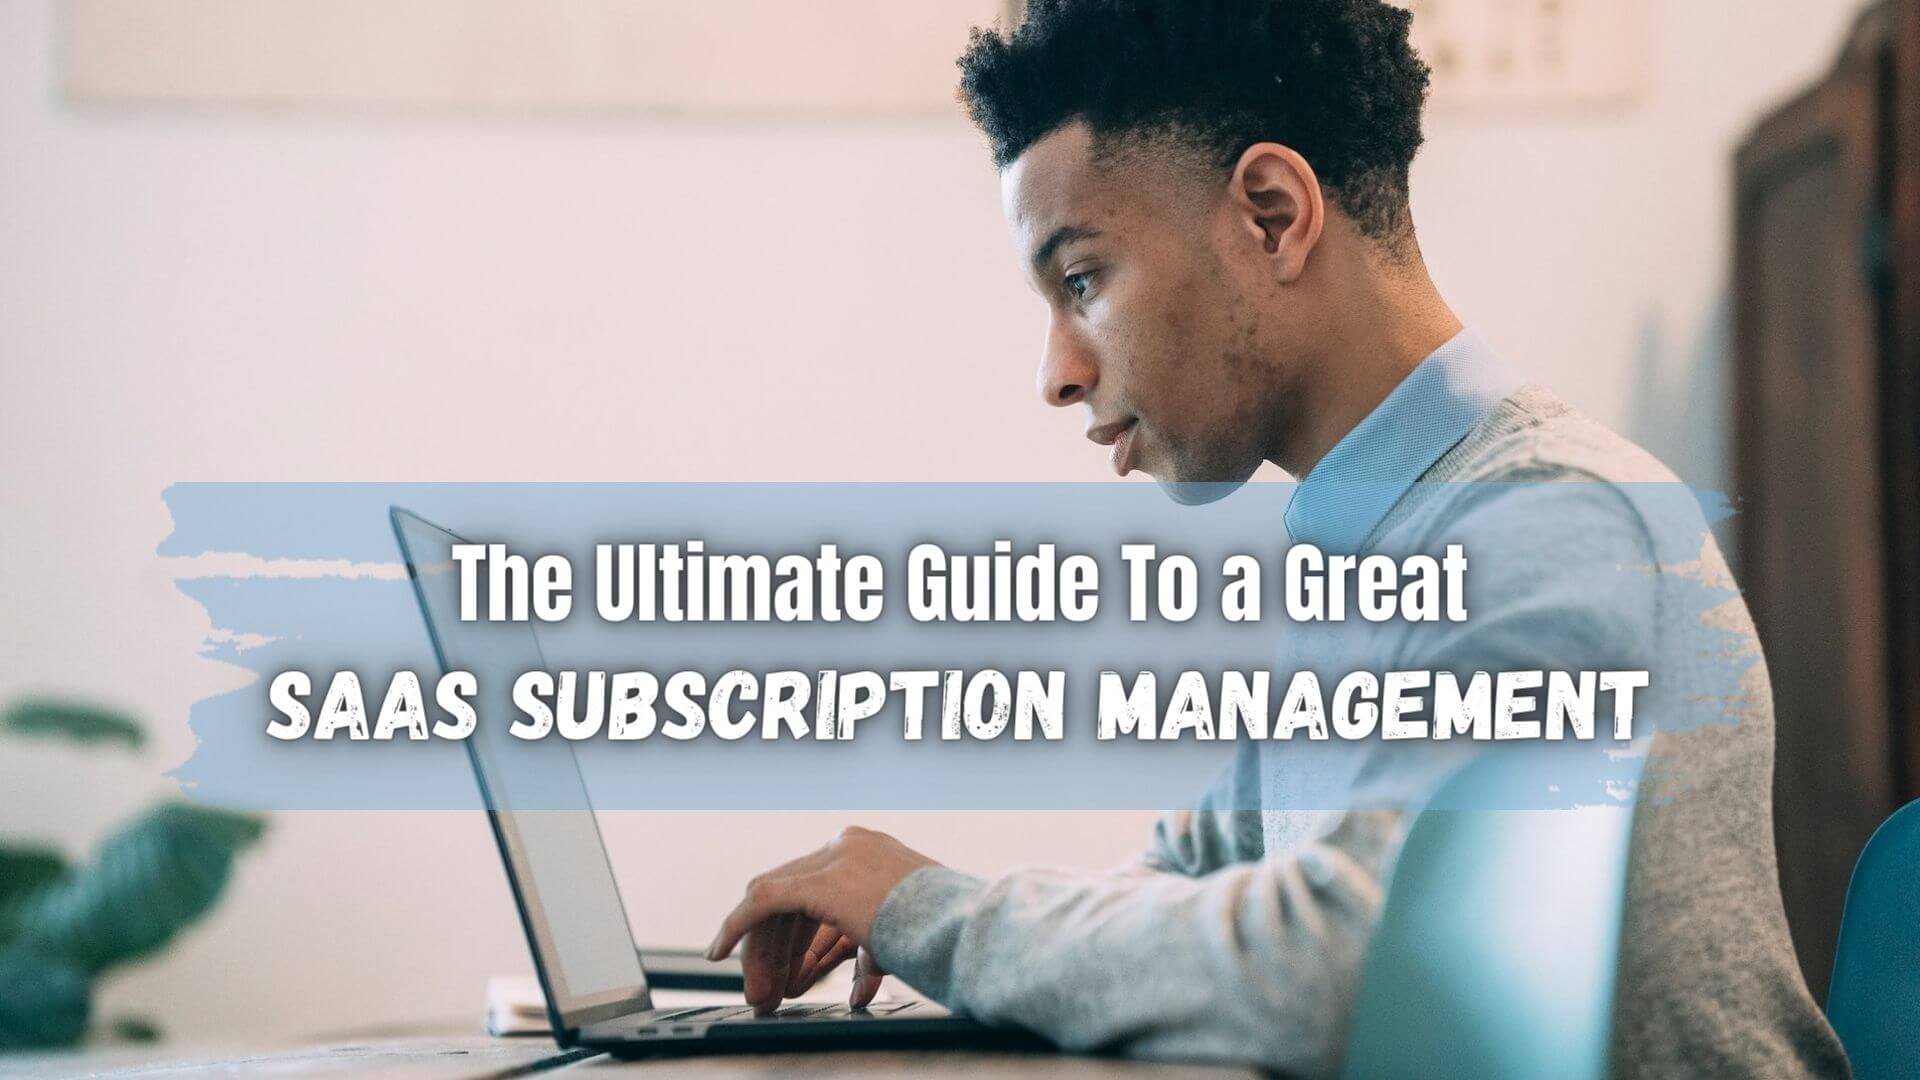 Setting up a SaaS subscription management system can be challenging, but with the right tools and strategies, it's doable. Learn more!